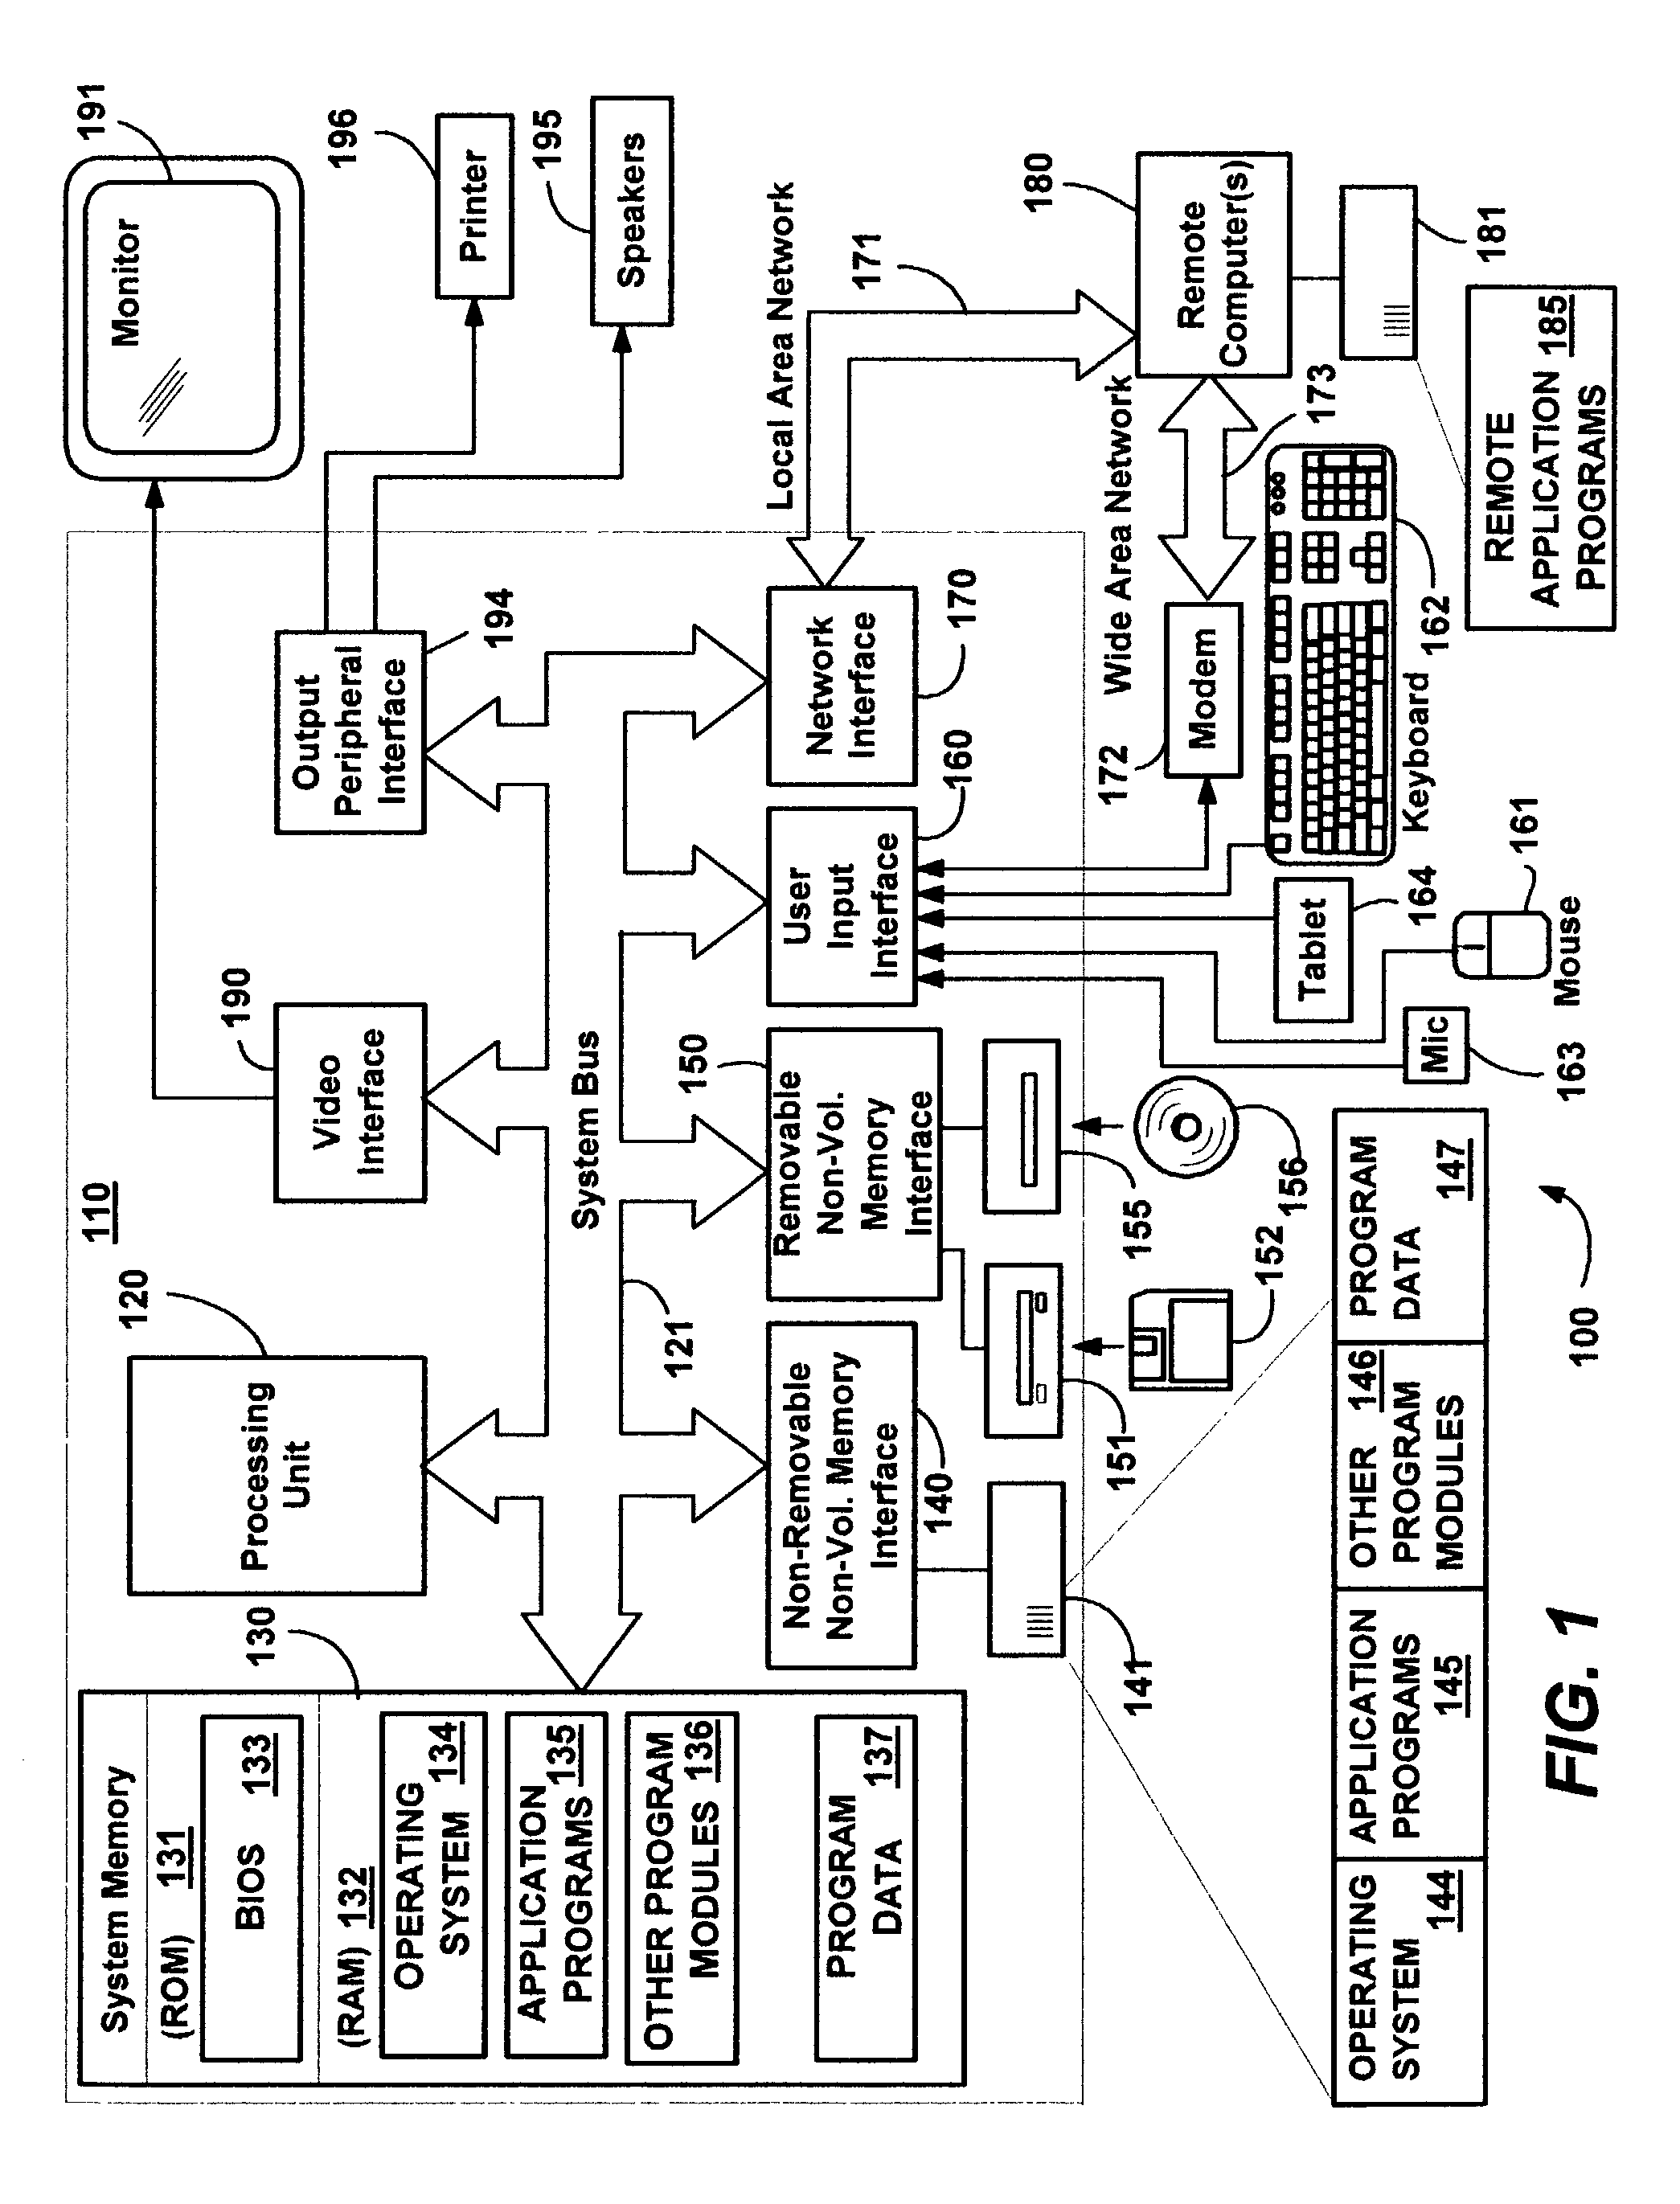 Three-dimensional virtual tour method and system